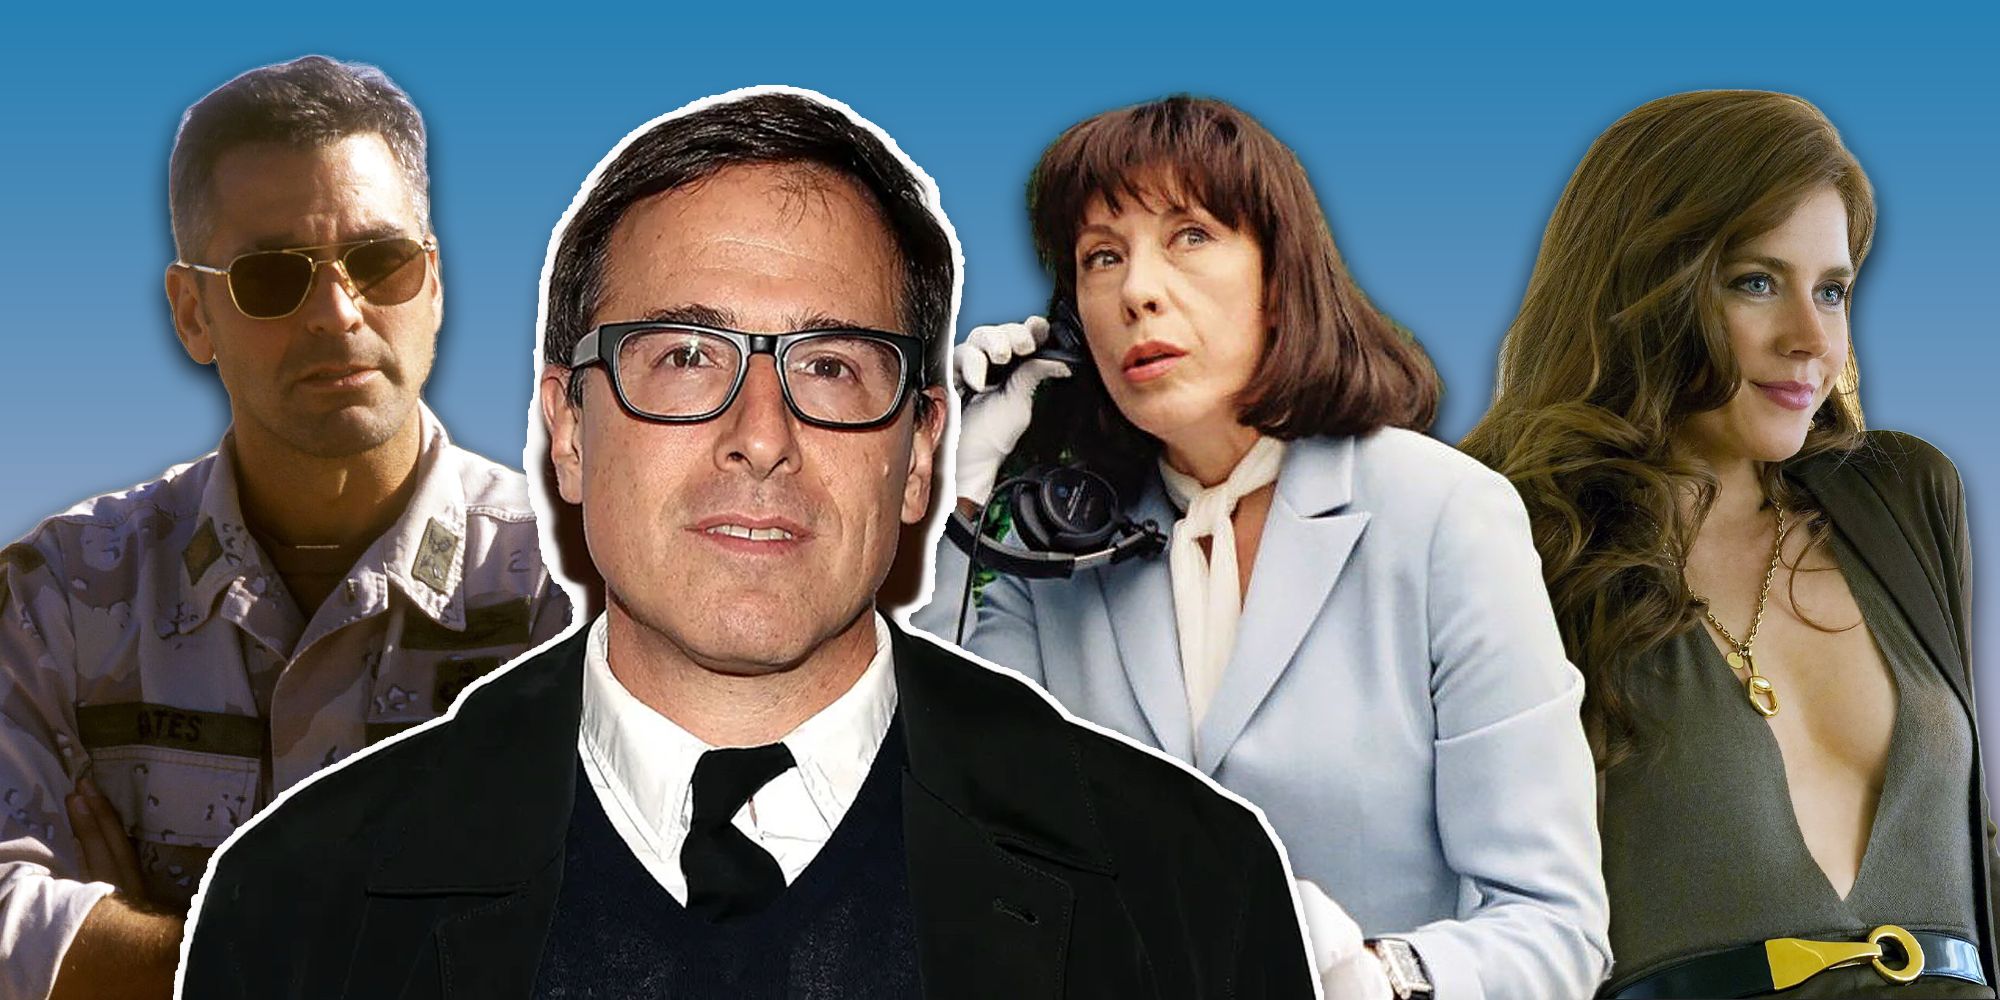 Director David O Russell has offended many of his stars over the years